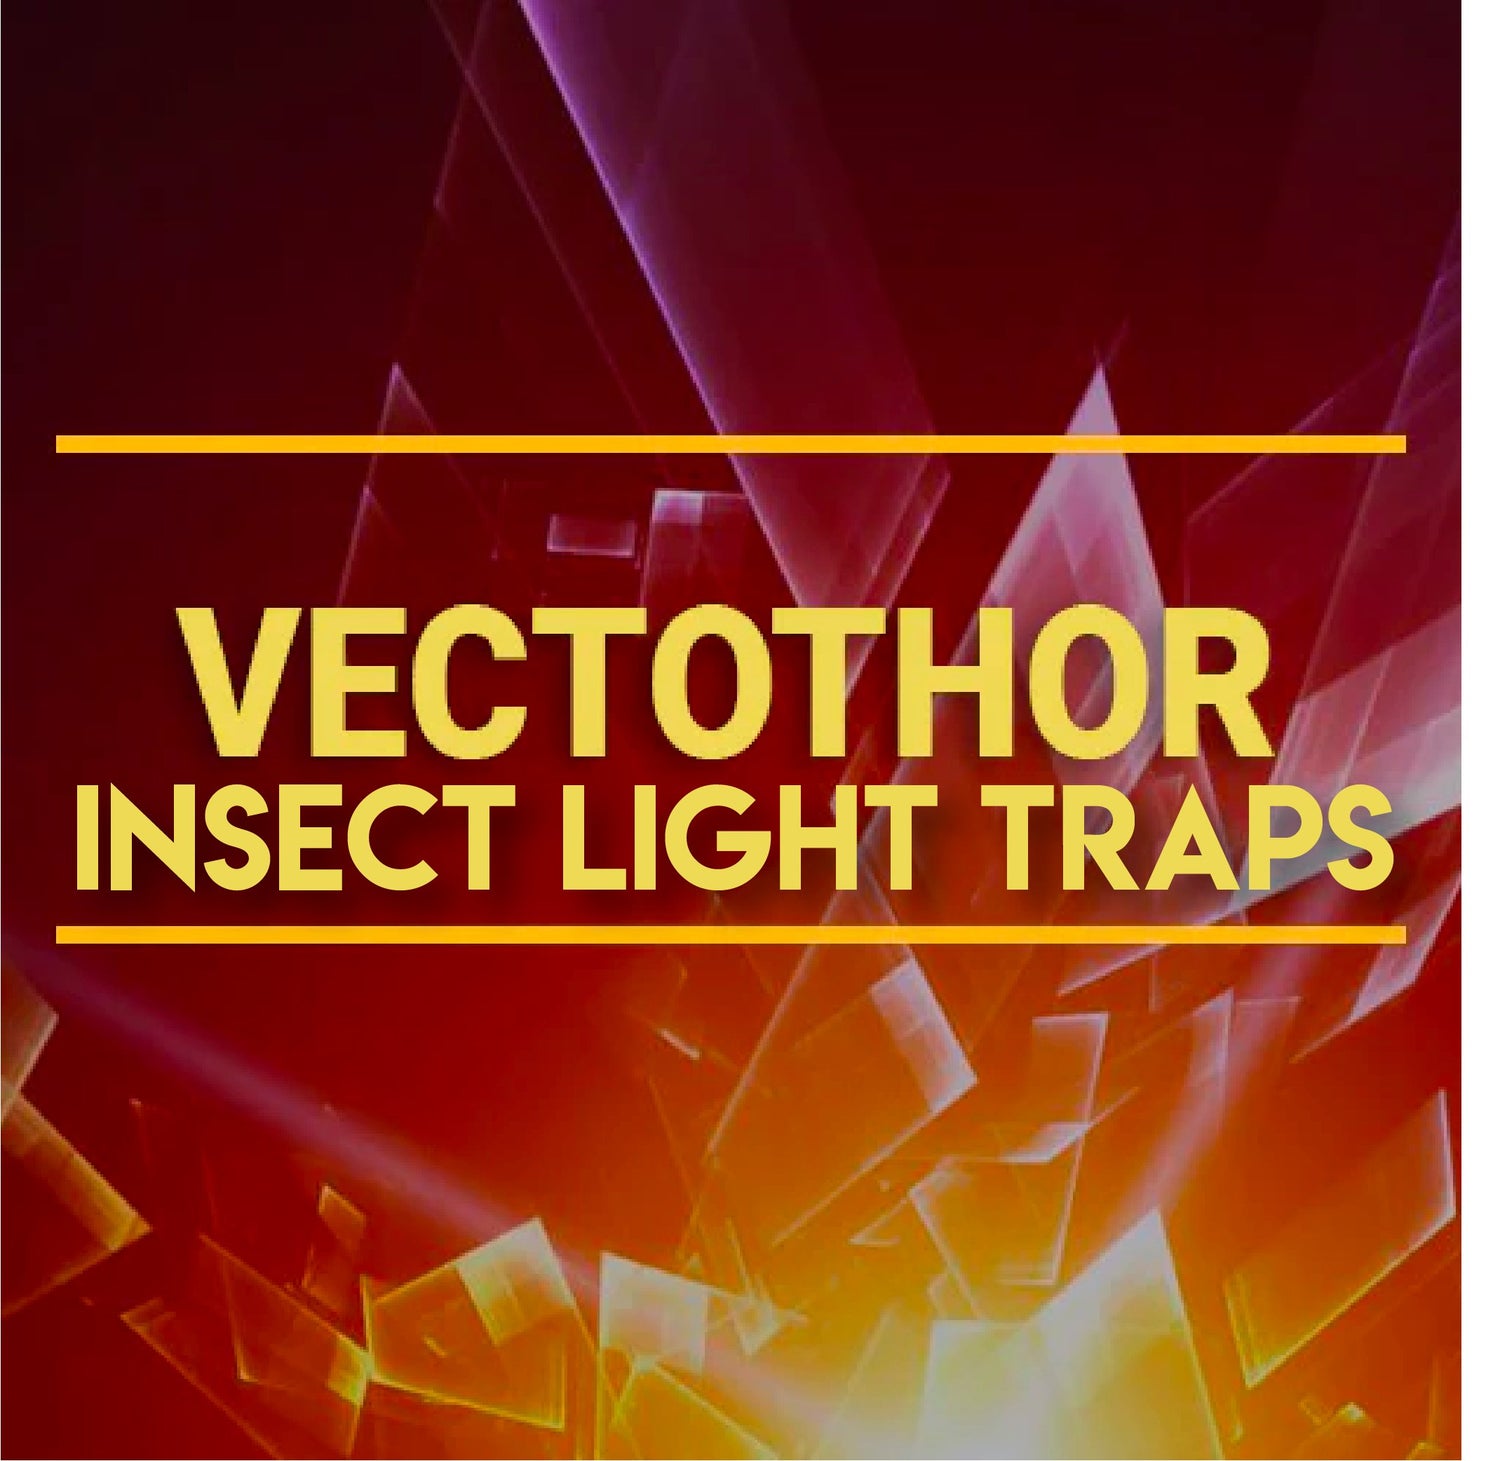 VECTOTHOR Insect Light Traps